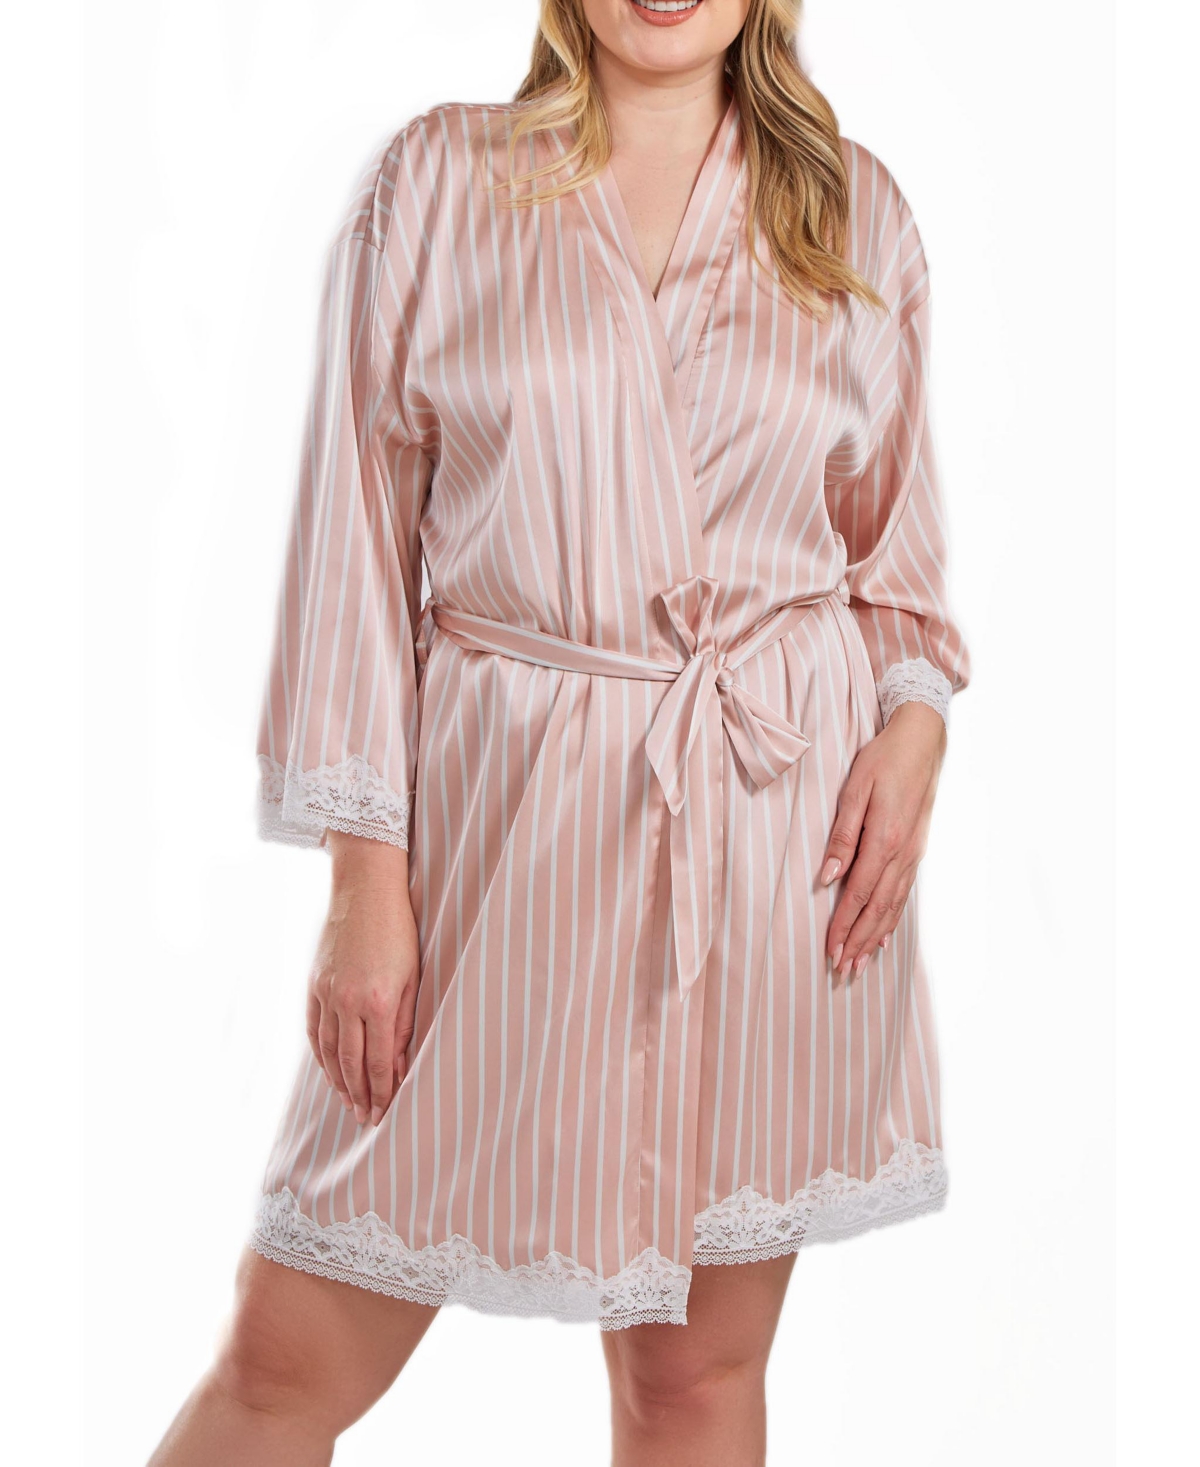 Shop Icollection Brillow Plus Size Satin Striped Robe With Self Tie Sash And Trimmed In Lace In Pink